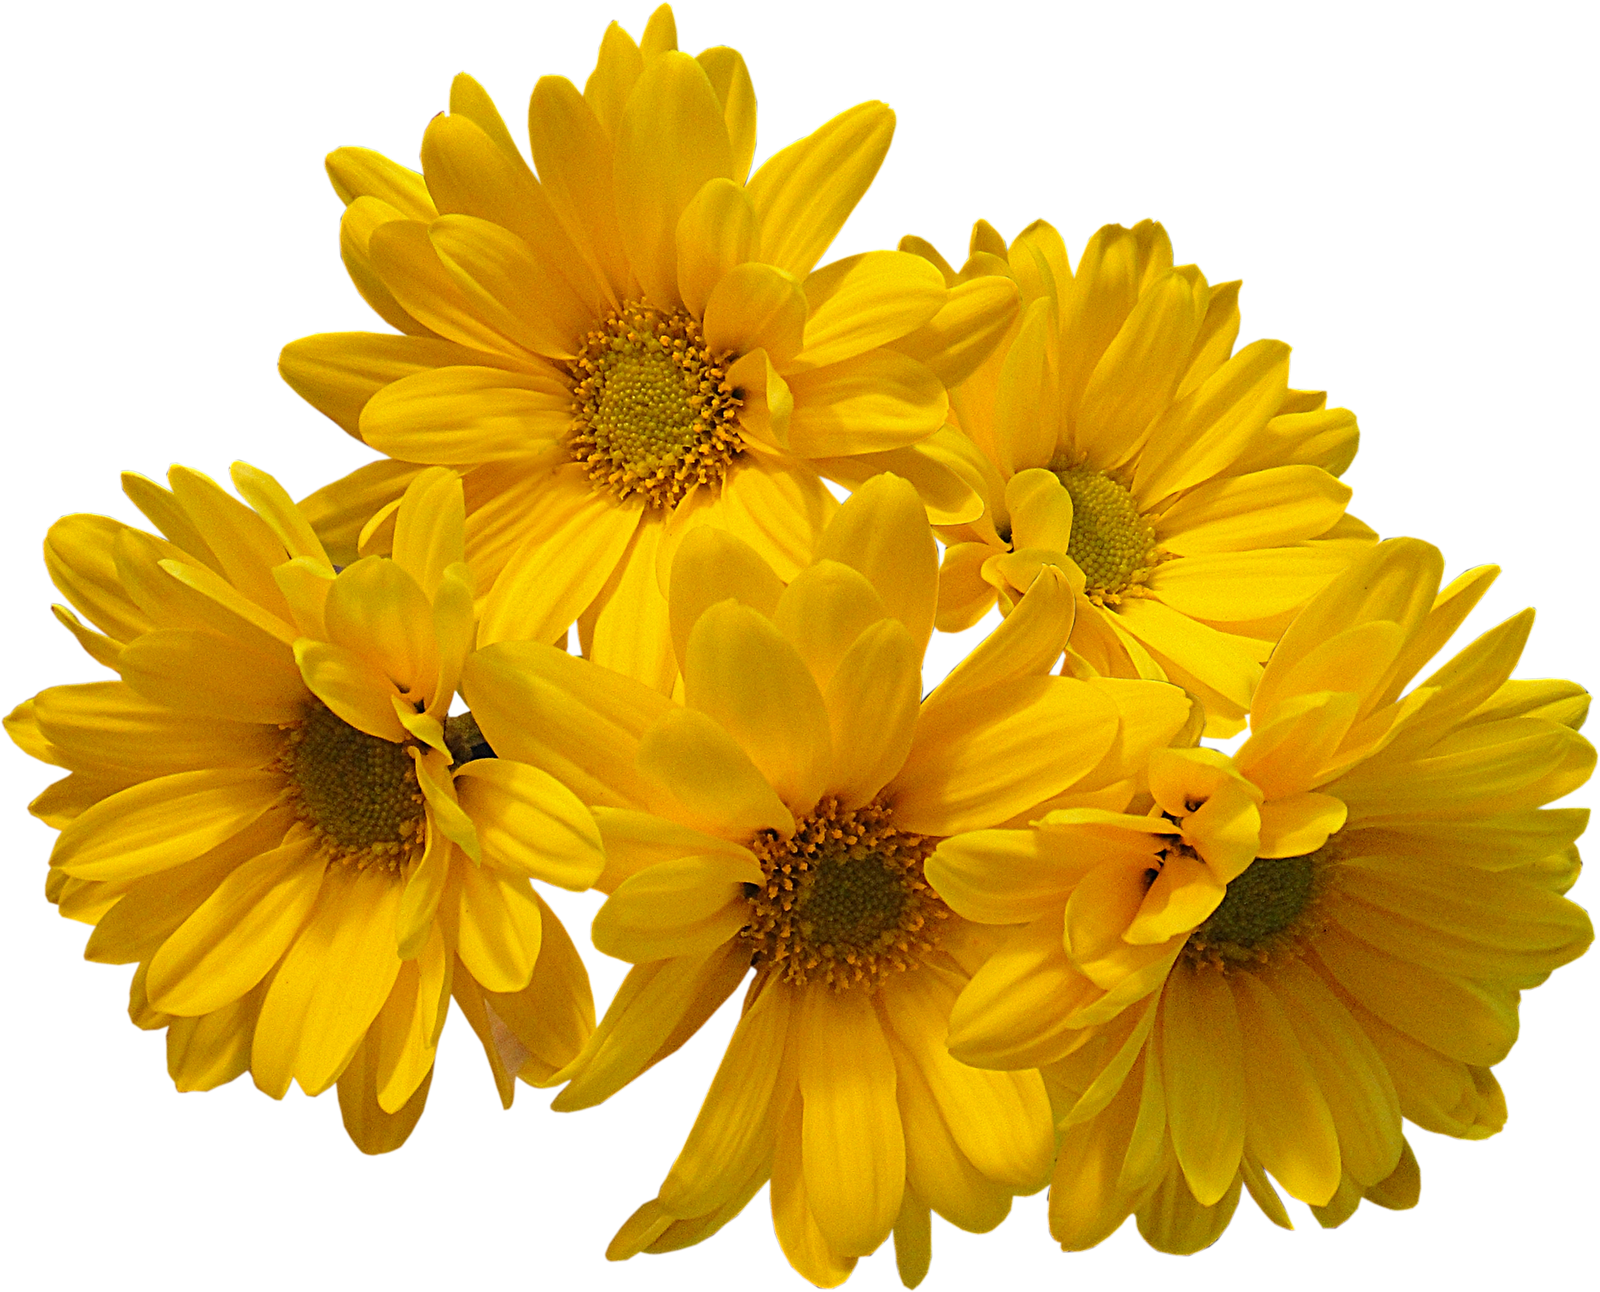 Download Yellow Flowers Bouquet Transparent Image HQ PNG ...
